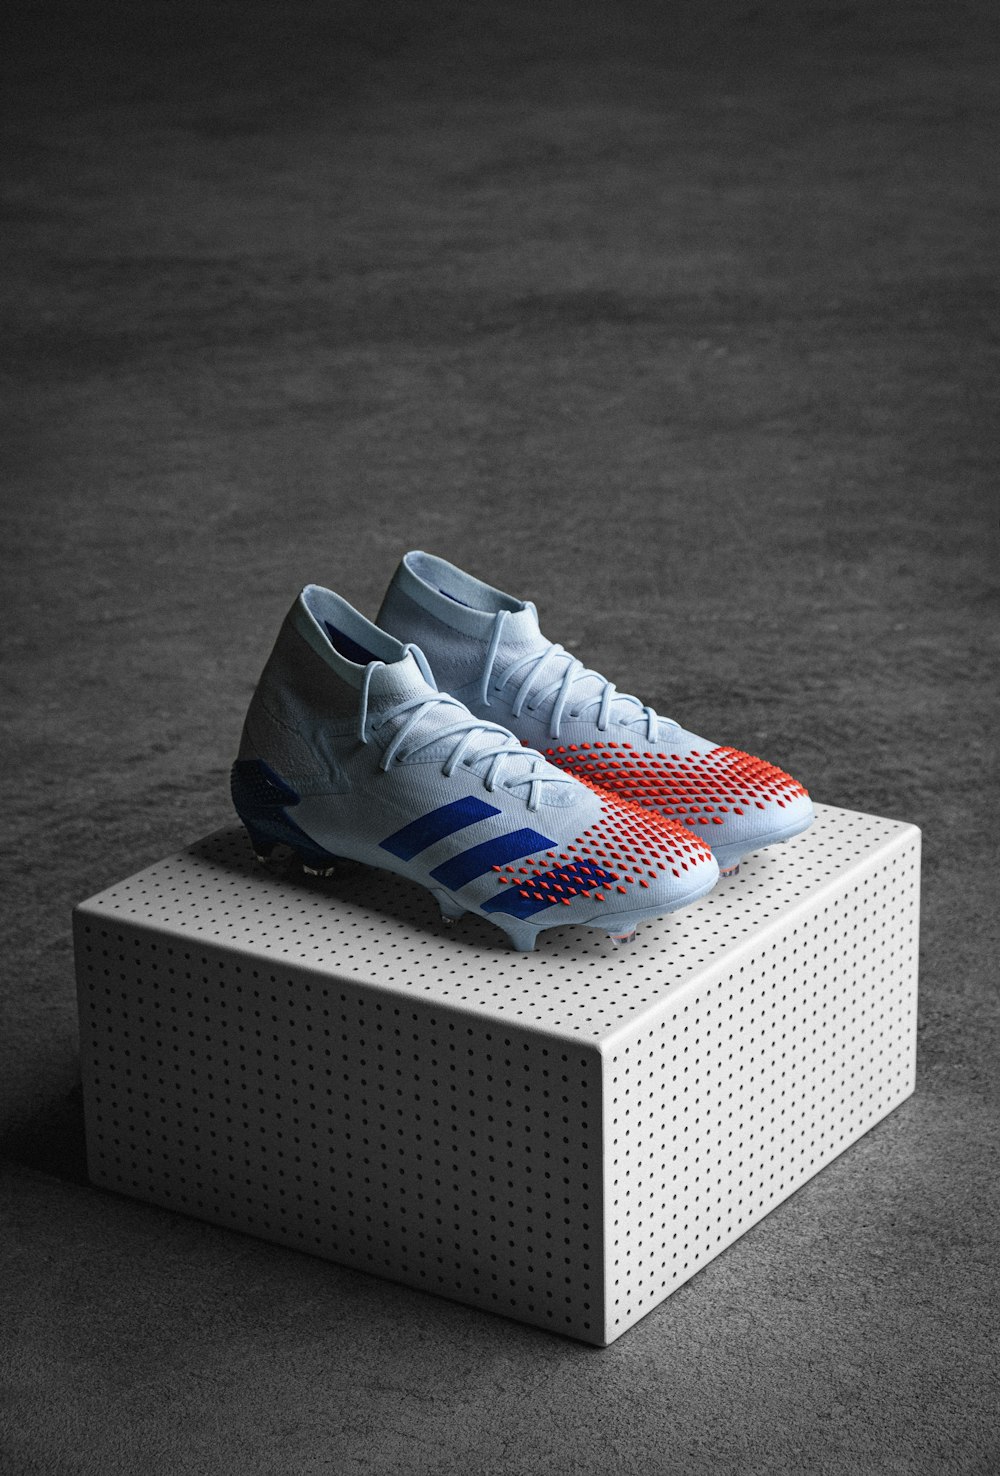 Football Boots Pictures | Download Free Images & Stock Photos on Unsplash